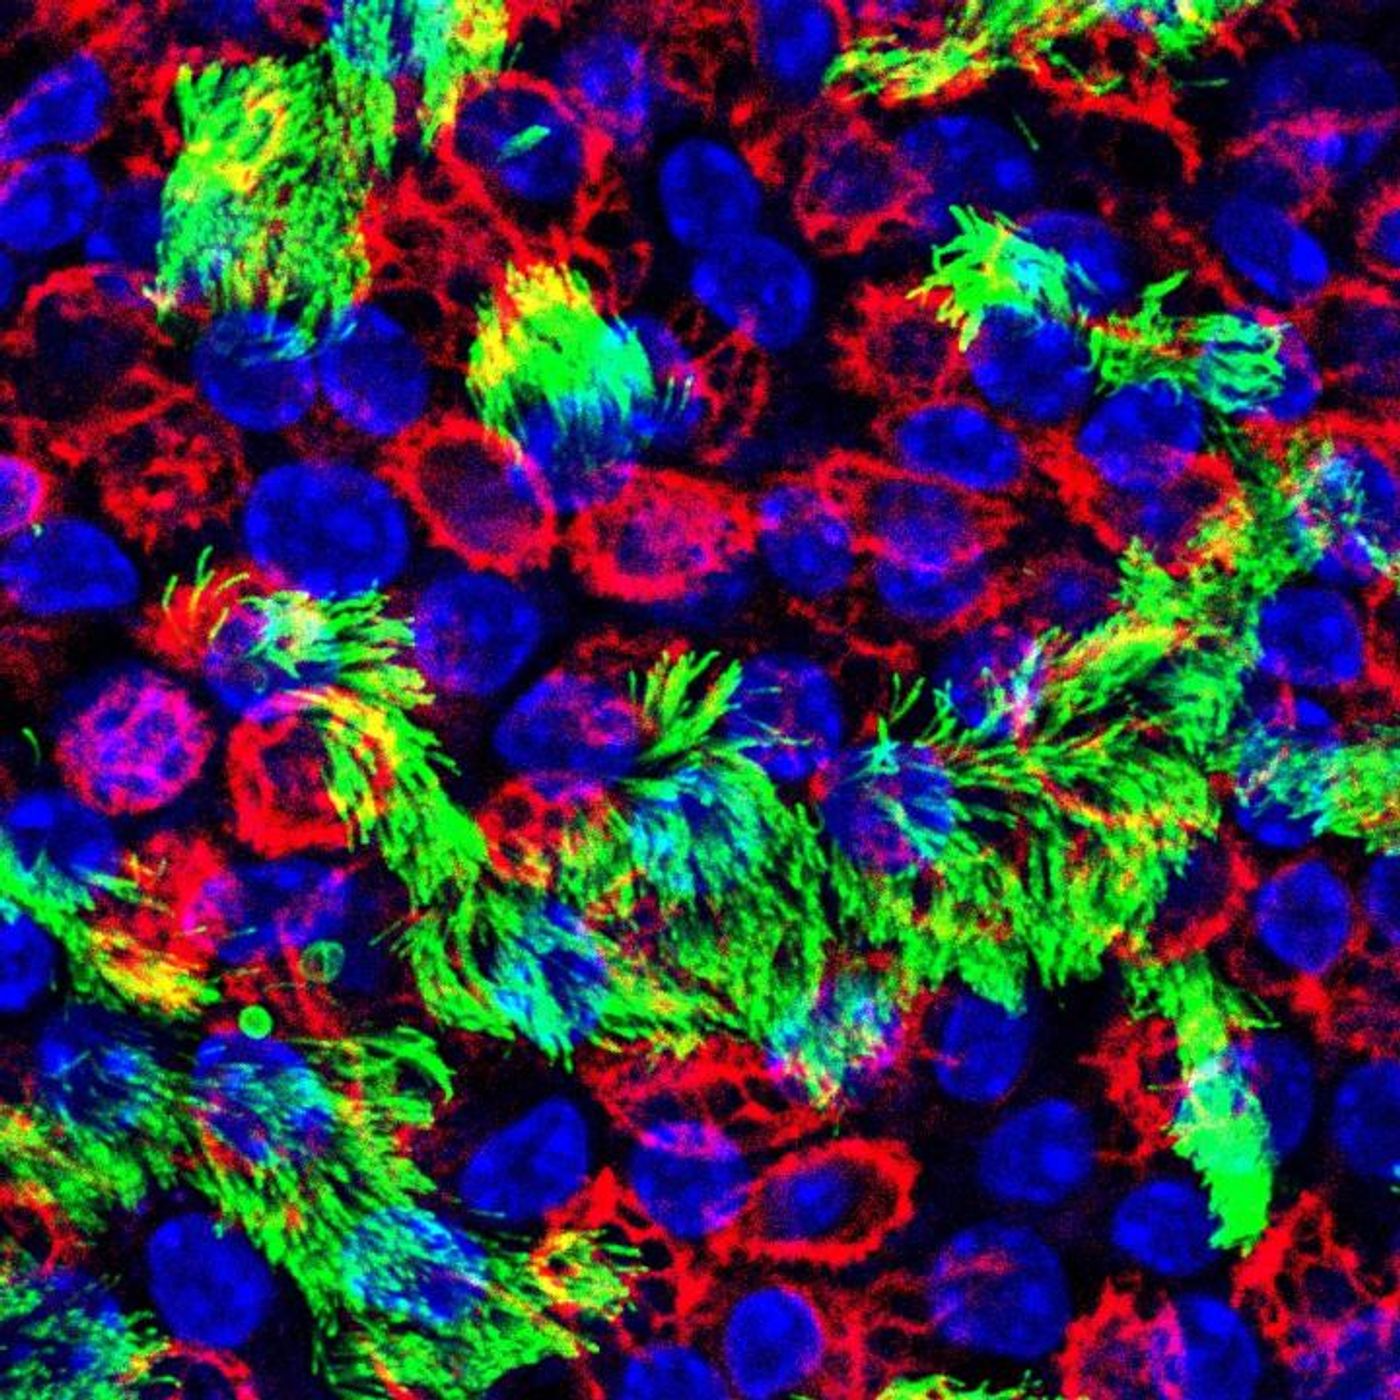 Cells of the upper respiratory tract are where influenza virus infection occurs. Red marks basal cells, green marks ciliated cells, and blue marks cell nuclei. Credit: Rebekah Dumm, Duke University